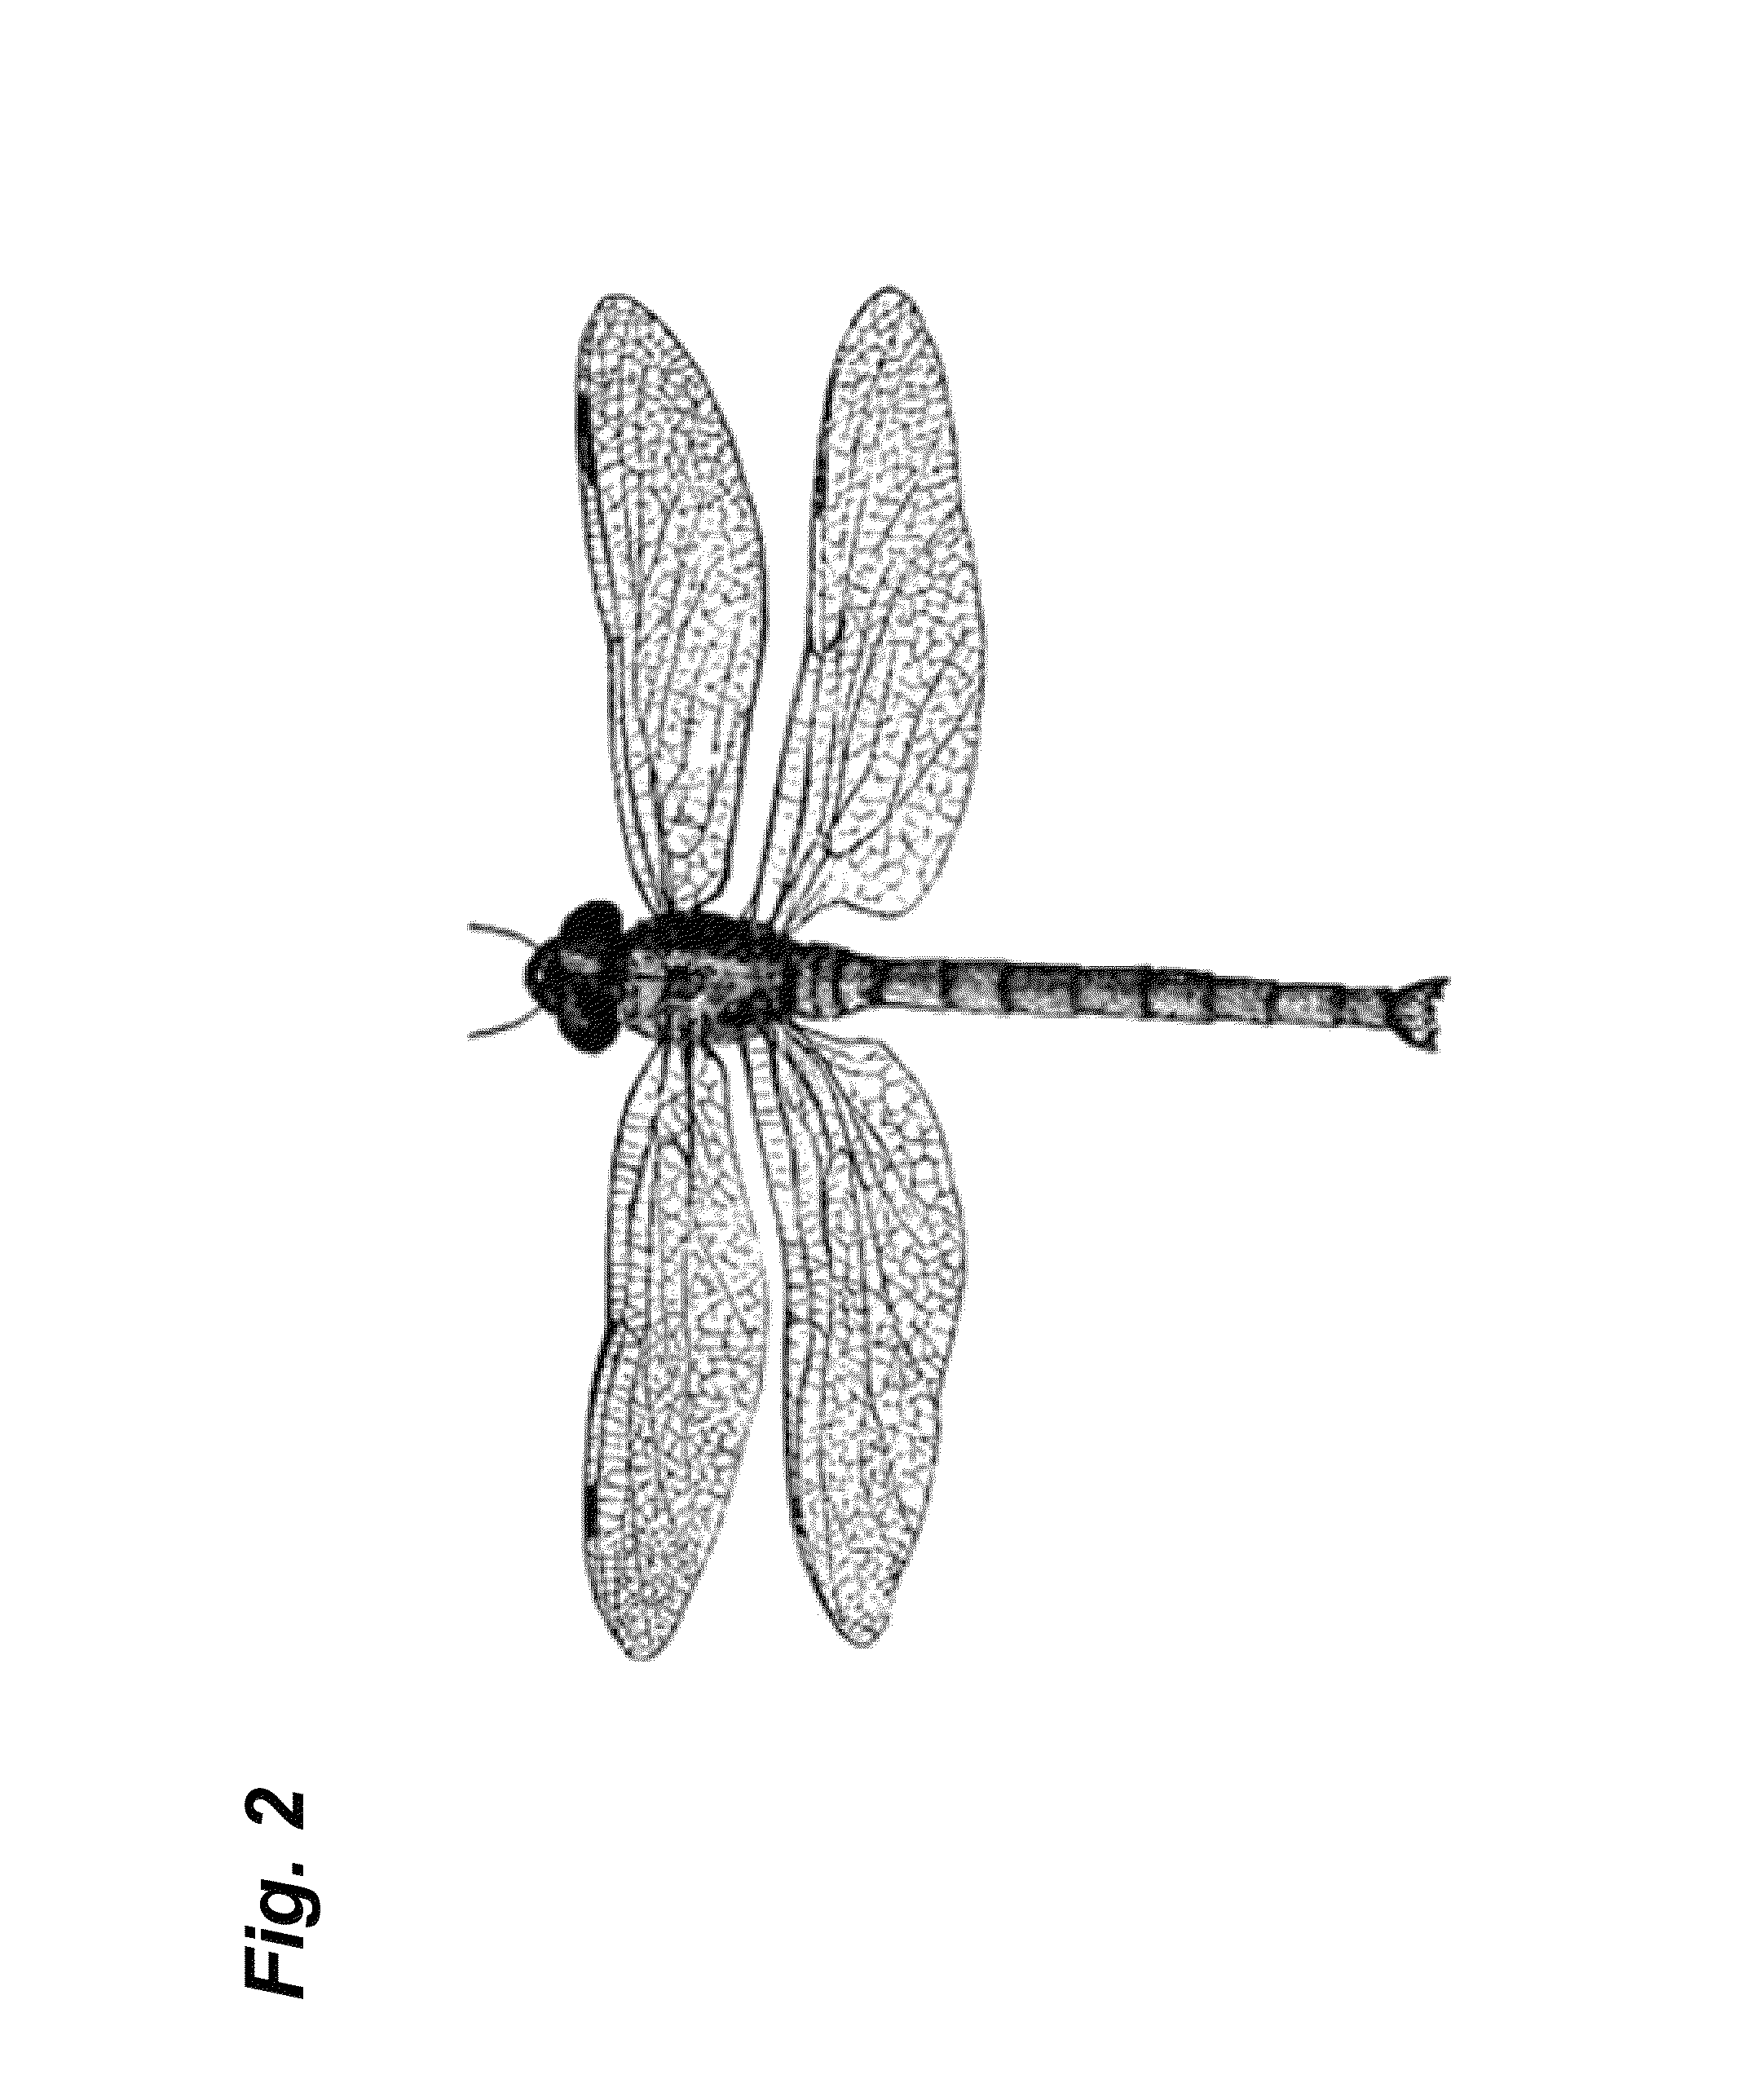 Hovering and gliding multi-wing flapping micro aerial vehicle